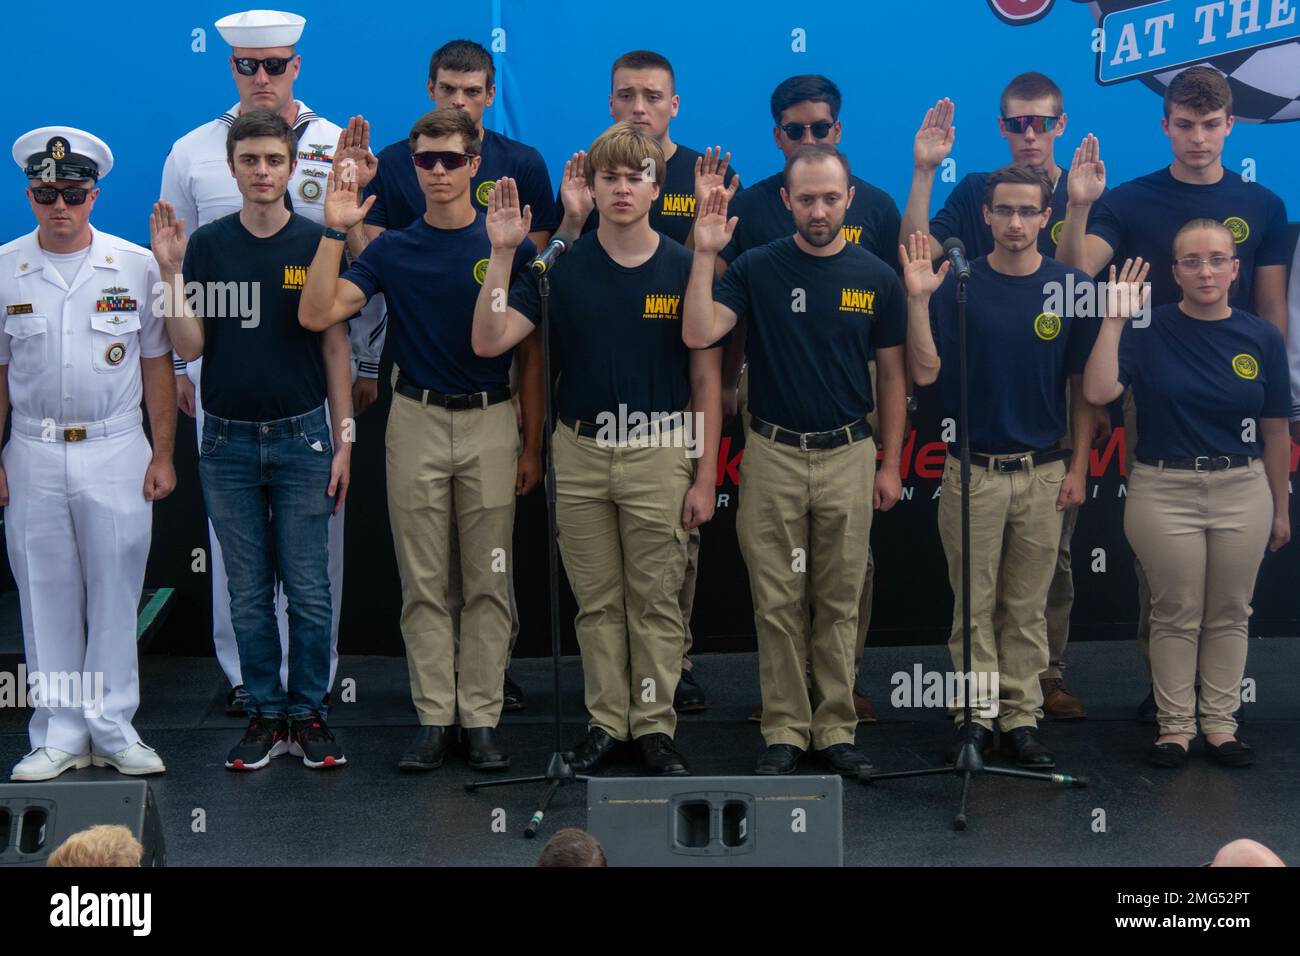 220821-N-RB168-0328 WATKINS GLEN, N.Y. (August 21, 2022) —  Eleven Future Sailors from Navy Talent Acquisition Group (NTAG) Pittsburgh take the oath of enlistment at the Go Bowling at the Watkins Glen NASCAR Xfinity Series race. Cmdr. Christopher McCurry, from Aloha, Ore., administered the oath. NTAG Pittsburgh, part of Navy Recruiting Command, recruits the next generation of Navy Sailors throughout areas in Pennsylvania, New York, West Virginia, and Maryland. Stock Photo